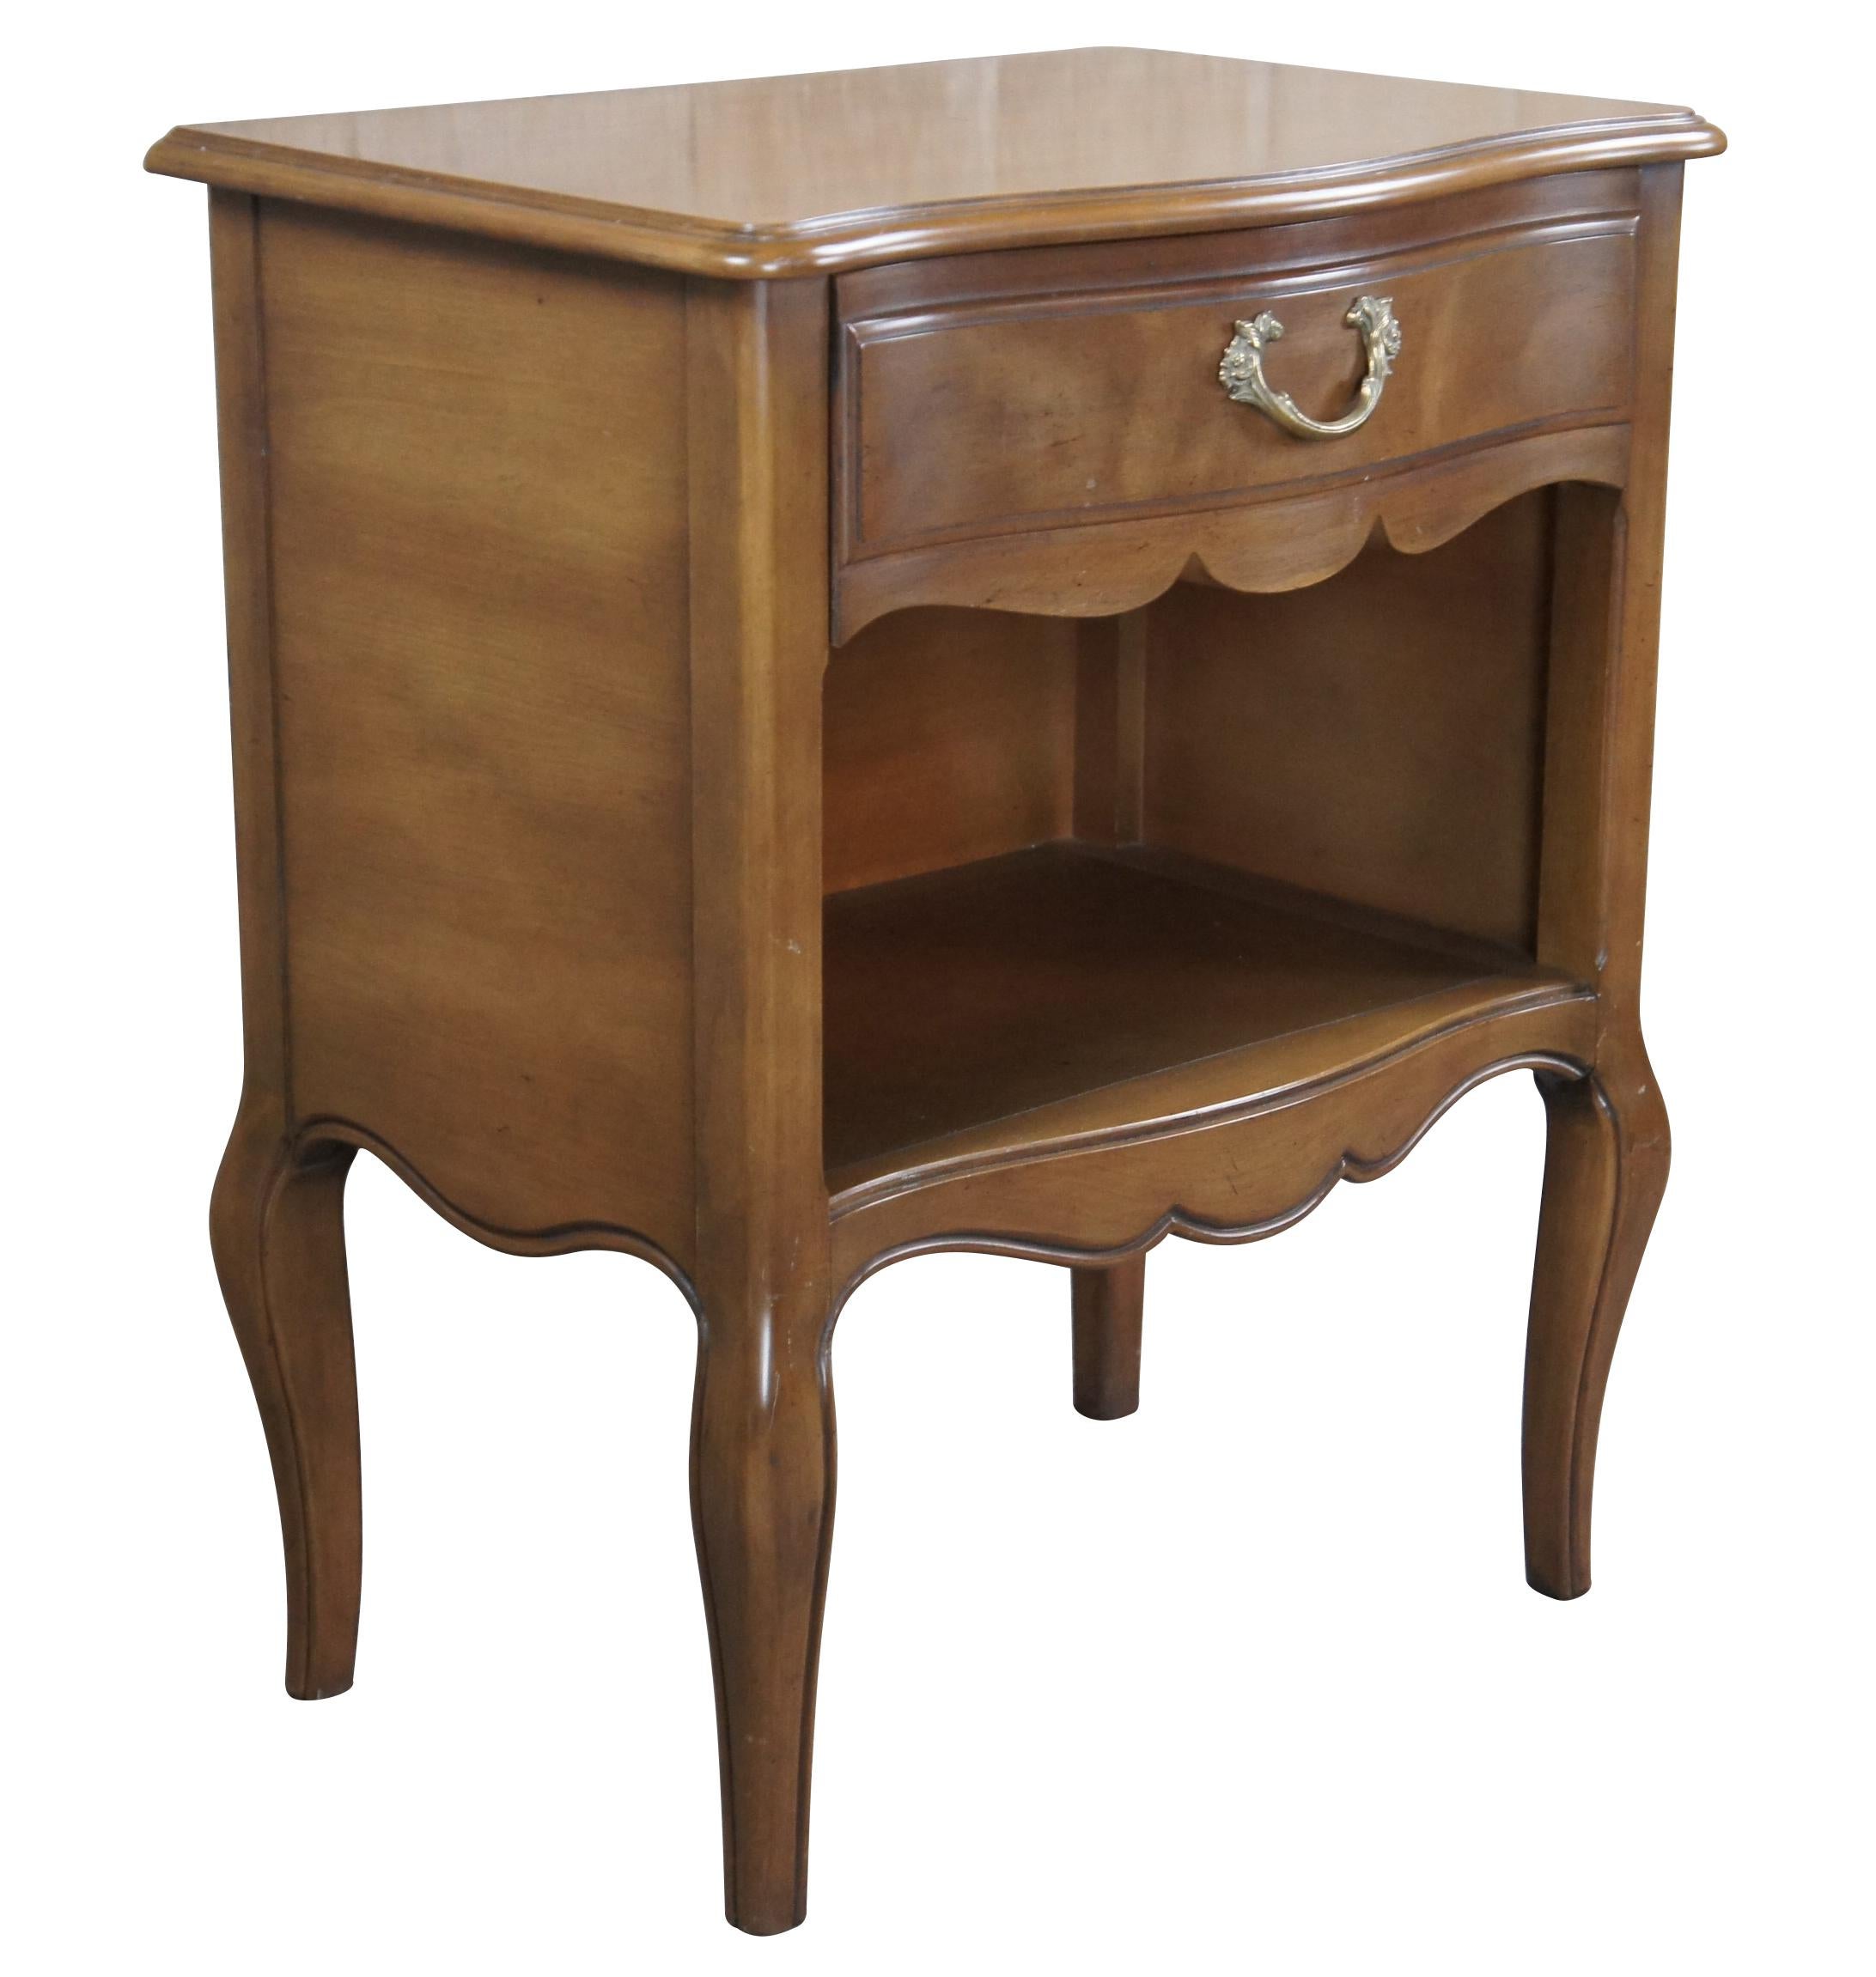 French Provincial bedside end table by Henredon Fine Furniture, circa 1970s. Features a serpentine frame made from American tulip wood with a dovetailed drawer over lower cubby with plug. The table is supported by cabriole legs. #9500